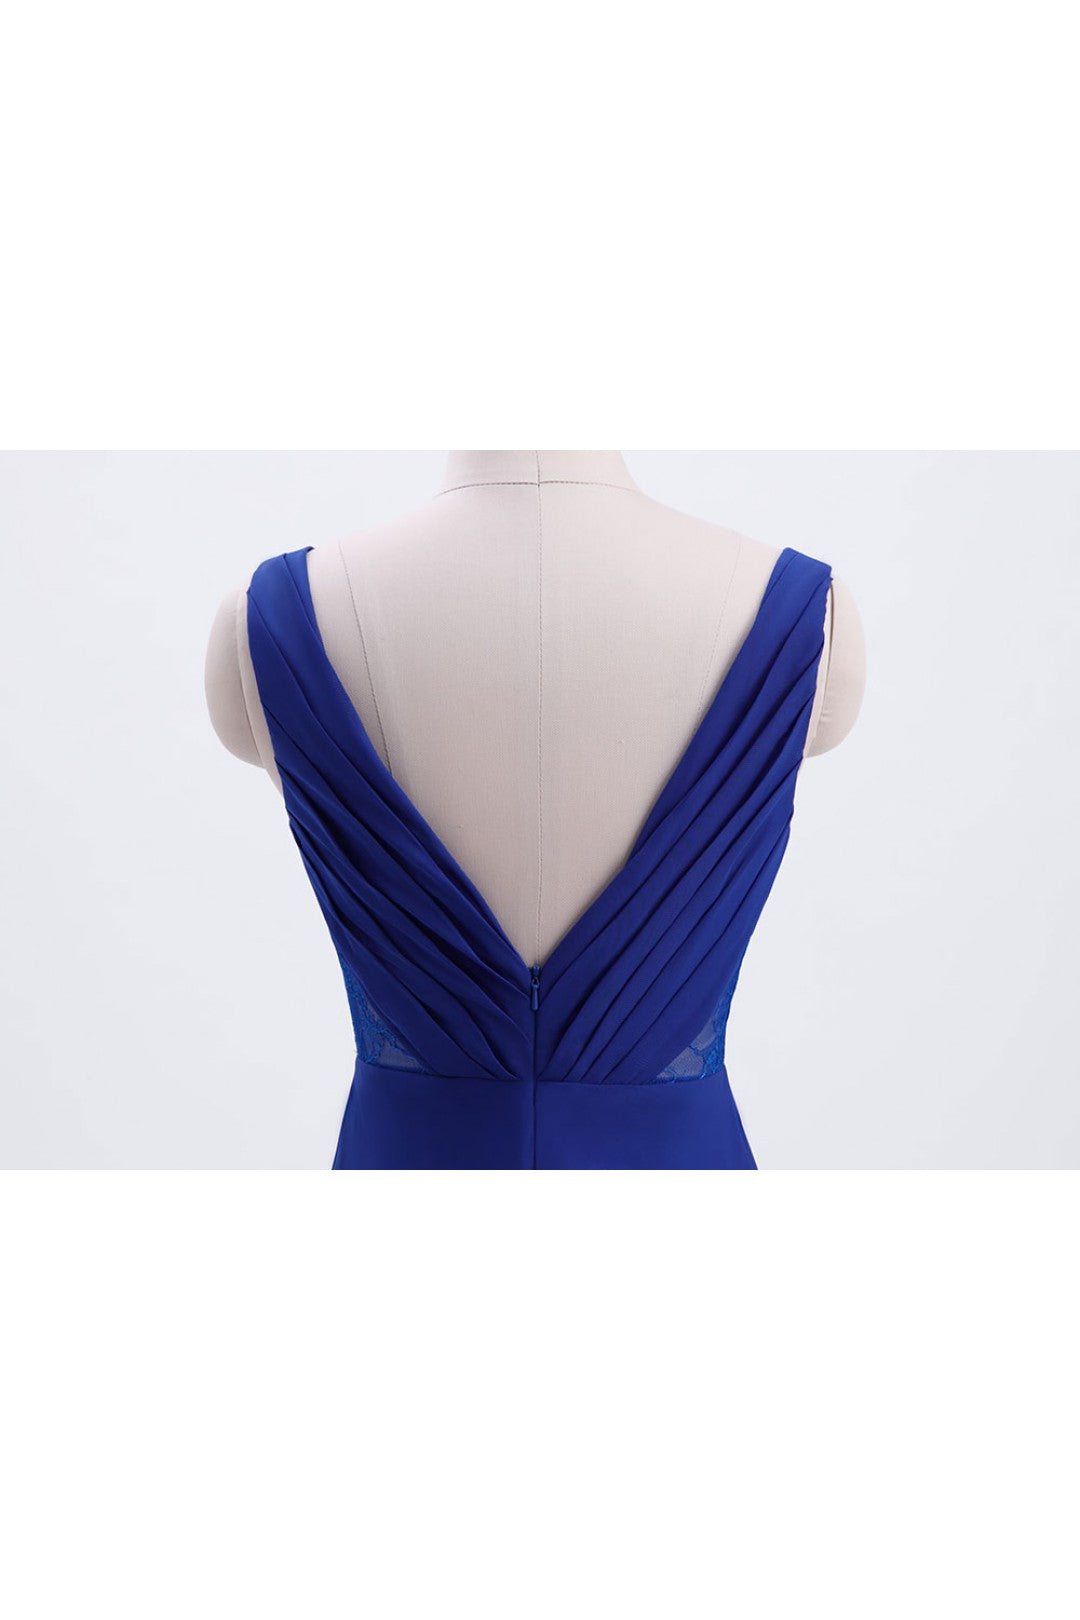 Evening Dresses Gowns, Royal Blue Pleated A-line Chiffon Long Bridesmaid Dress